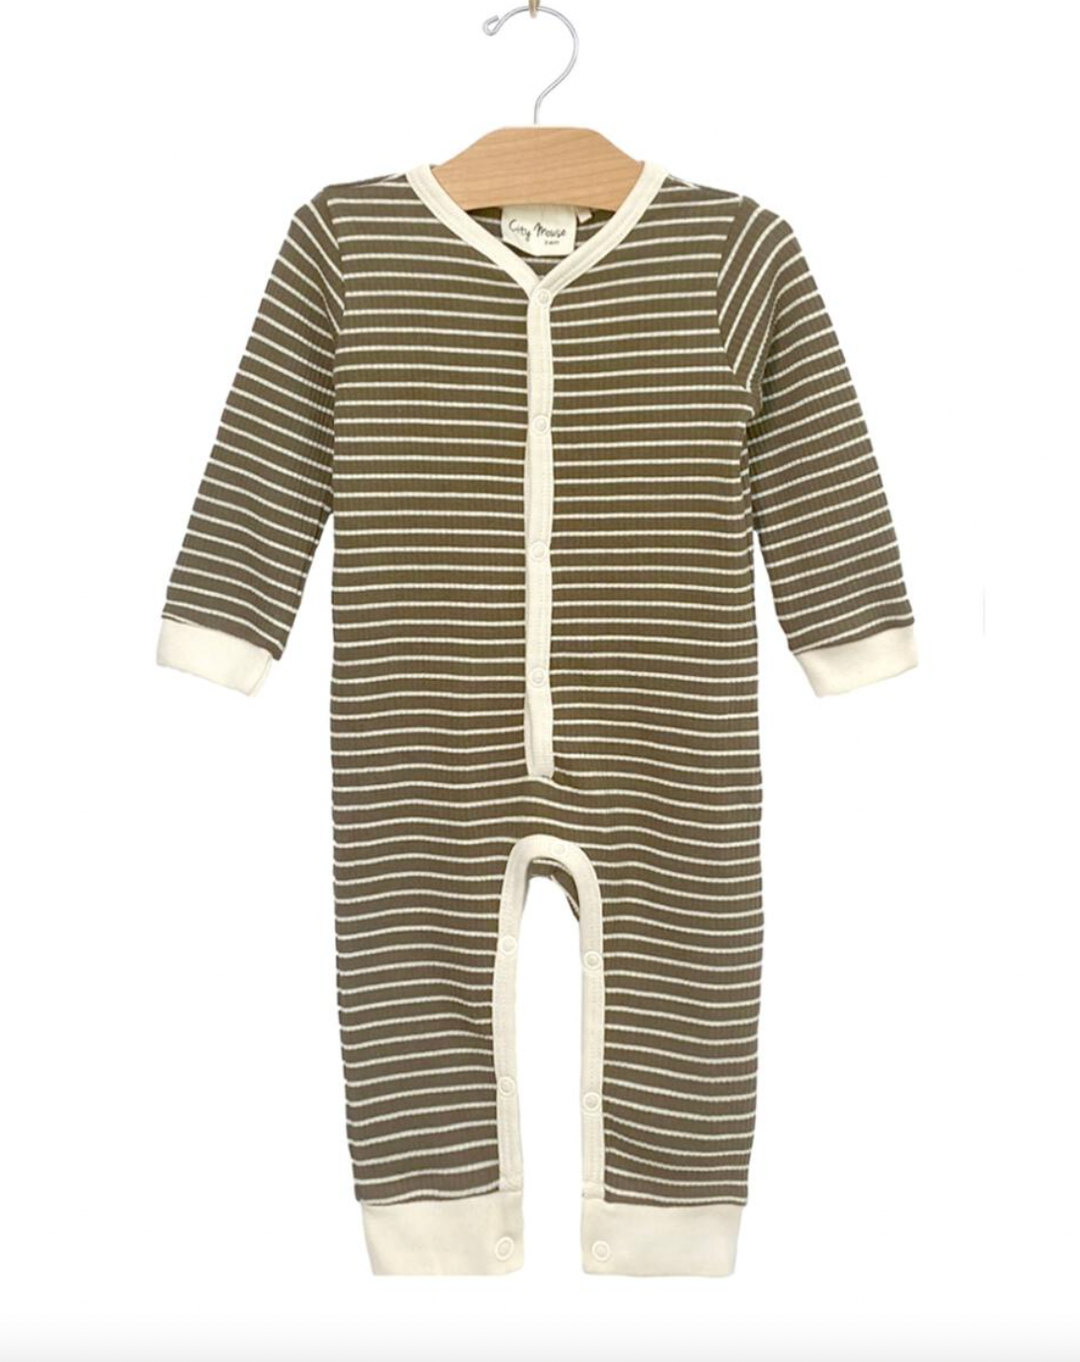 City Mouse - Organic Henley Snap Romper in Olive Stripes